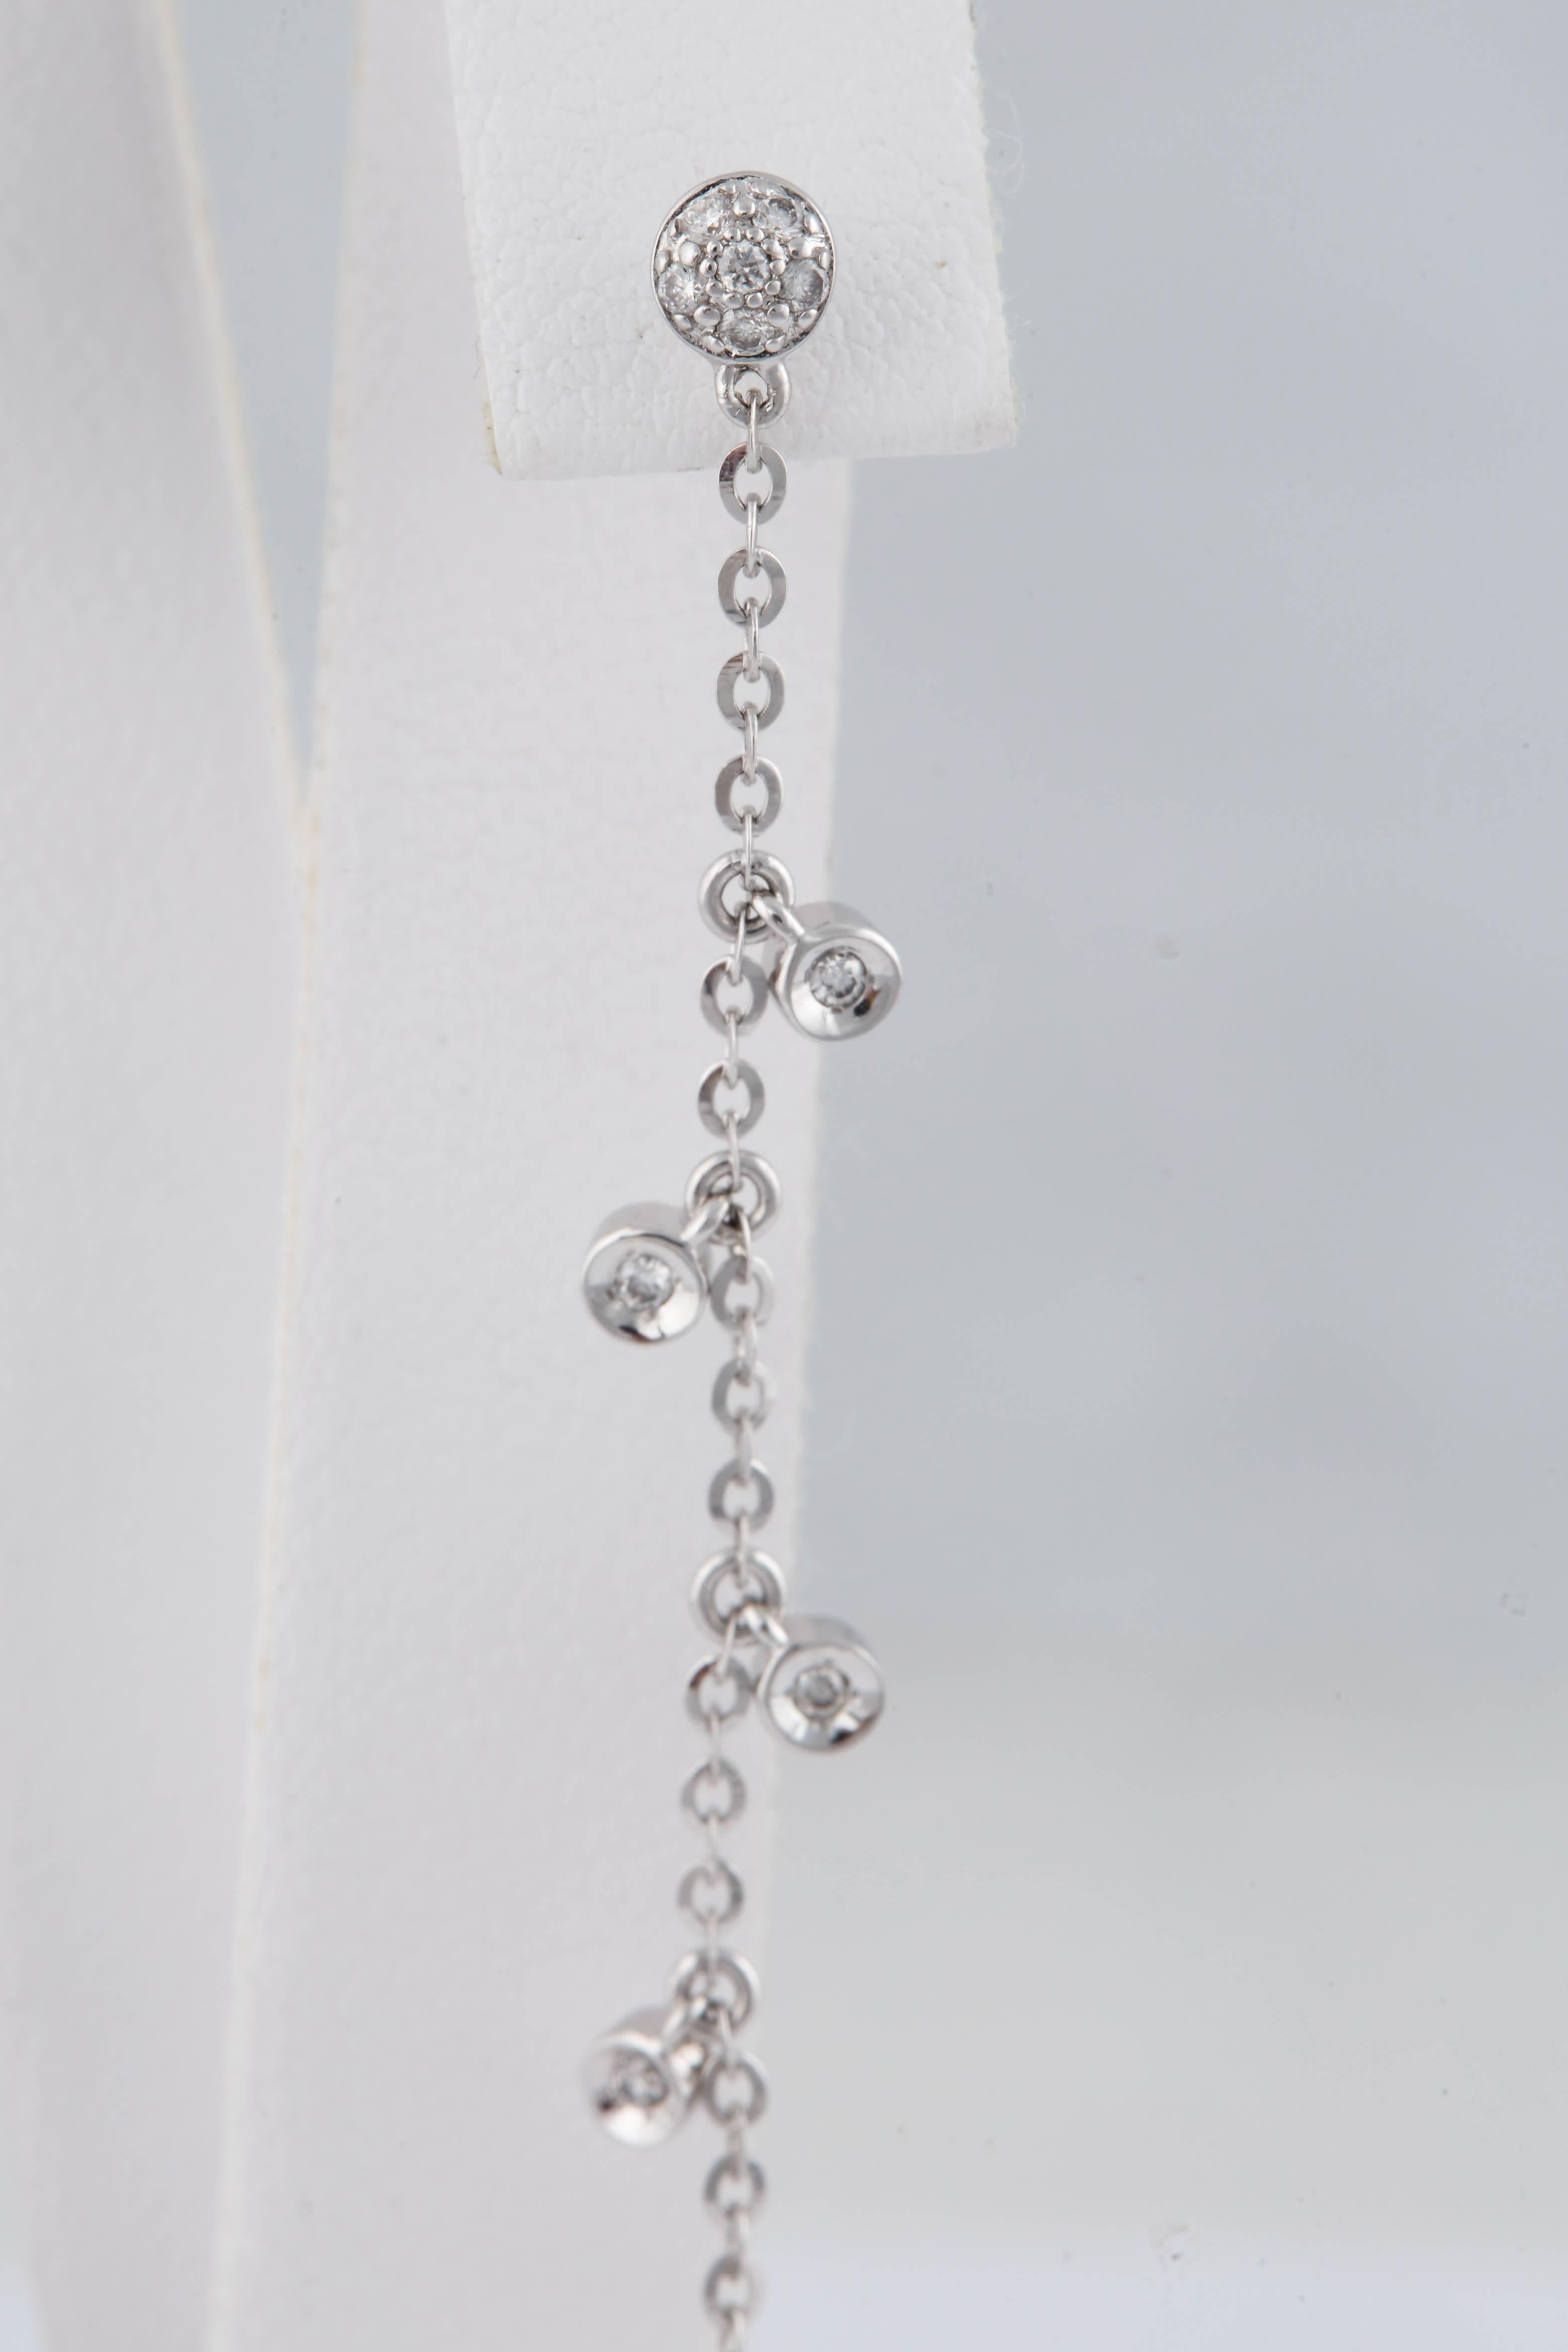 Contemporary Dangling South Sea Pearl with Diamond Accent Earrings